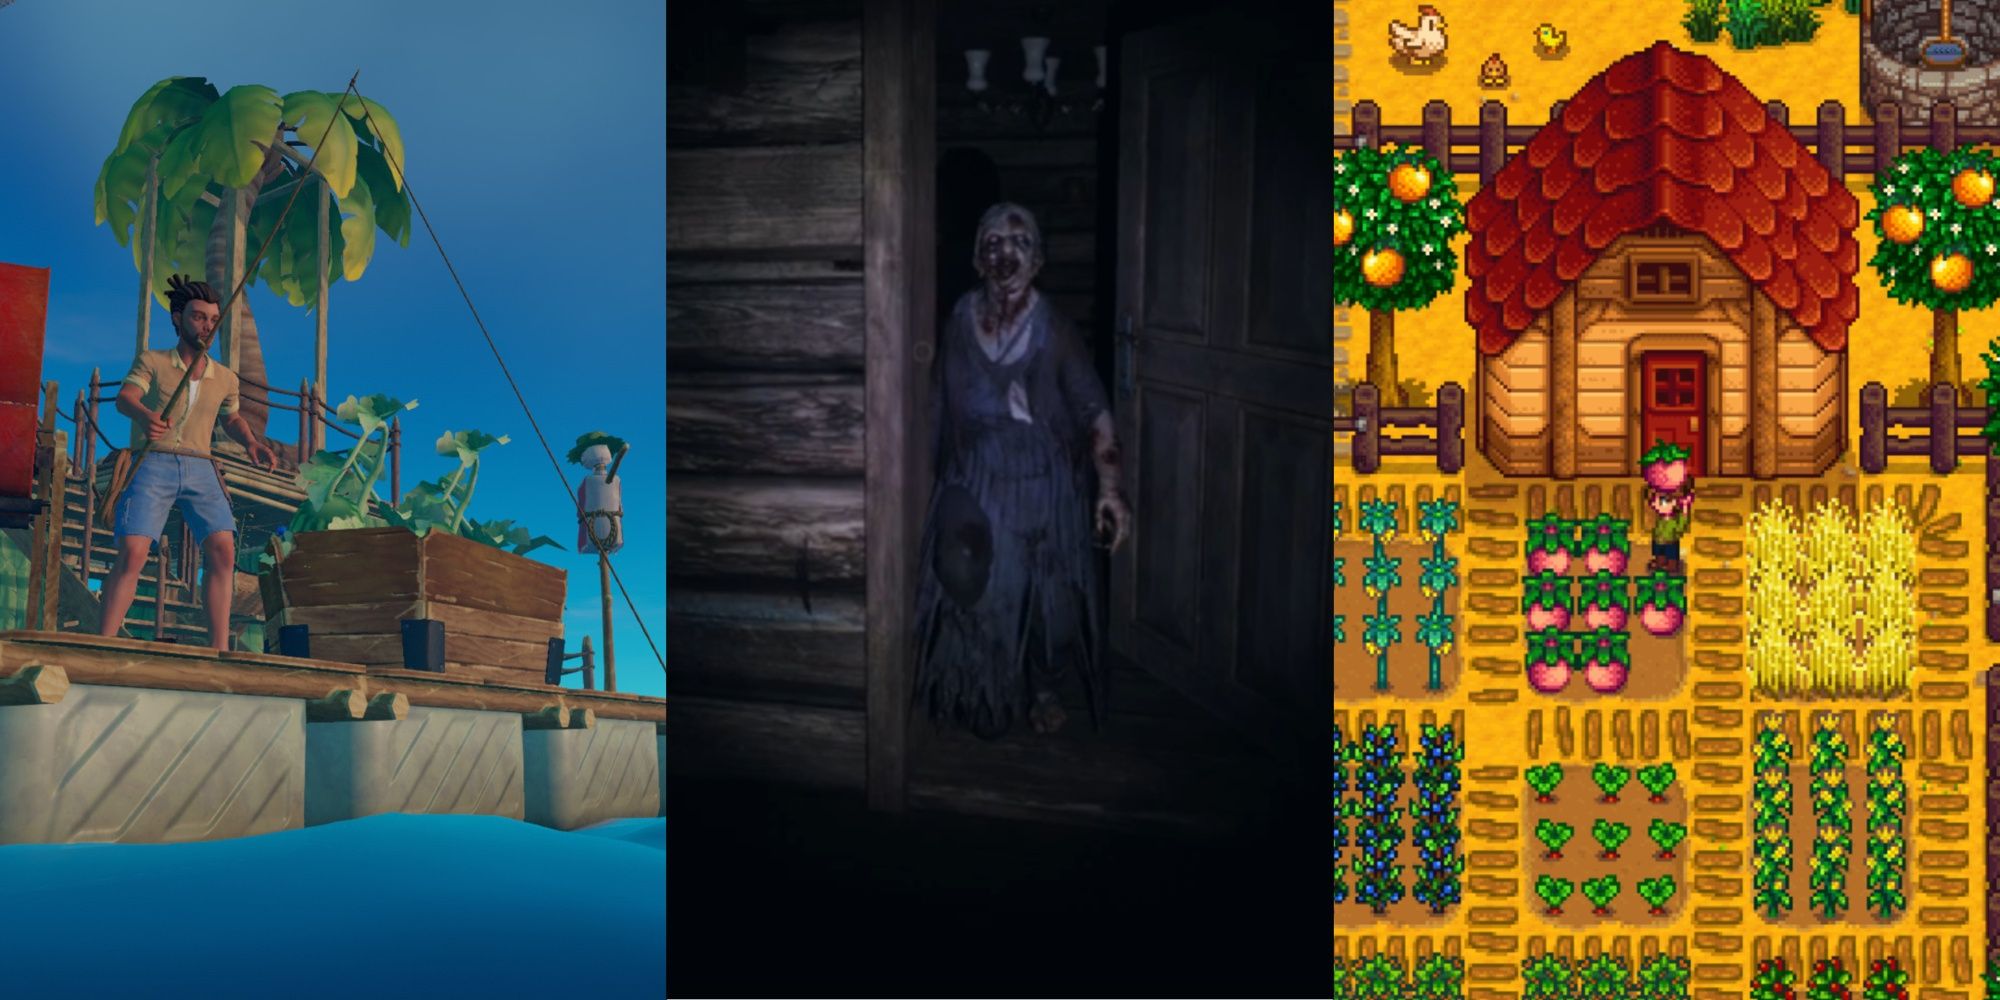 Steam Games under $20 feature image of three games side by side including Stardew Valley and Left 4 Dead 2